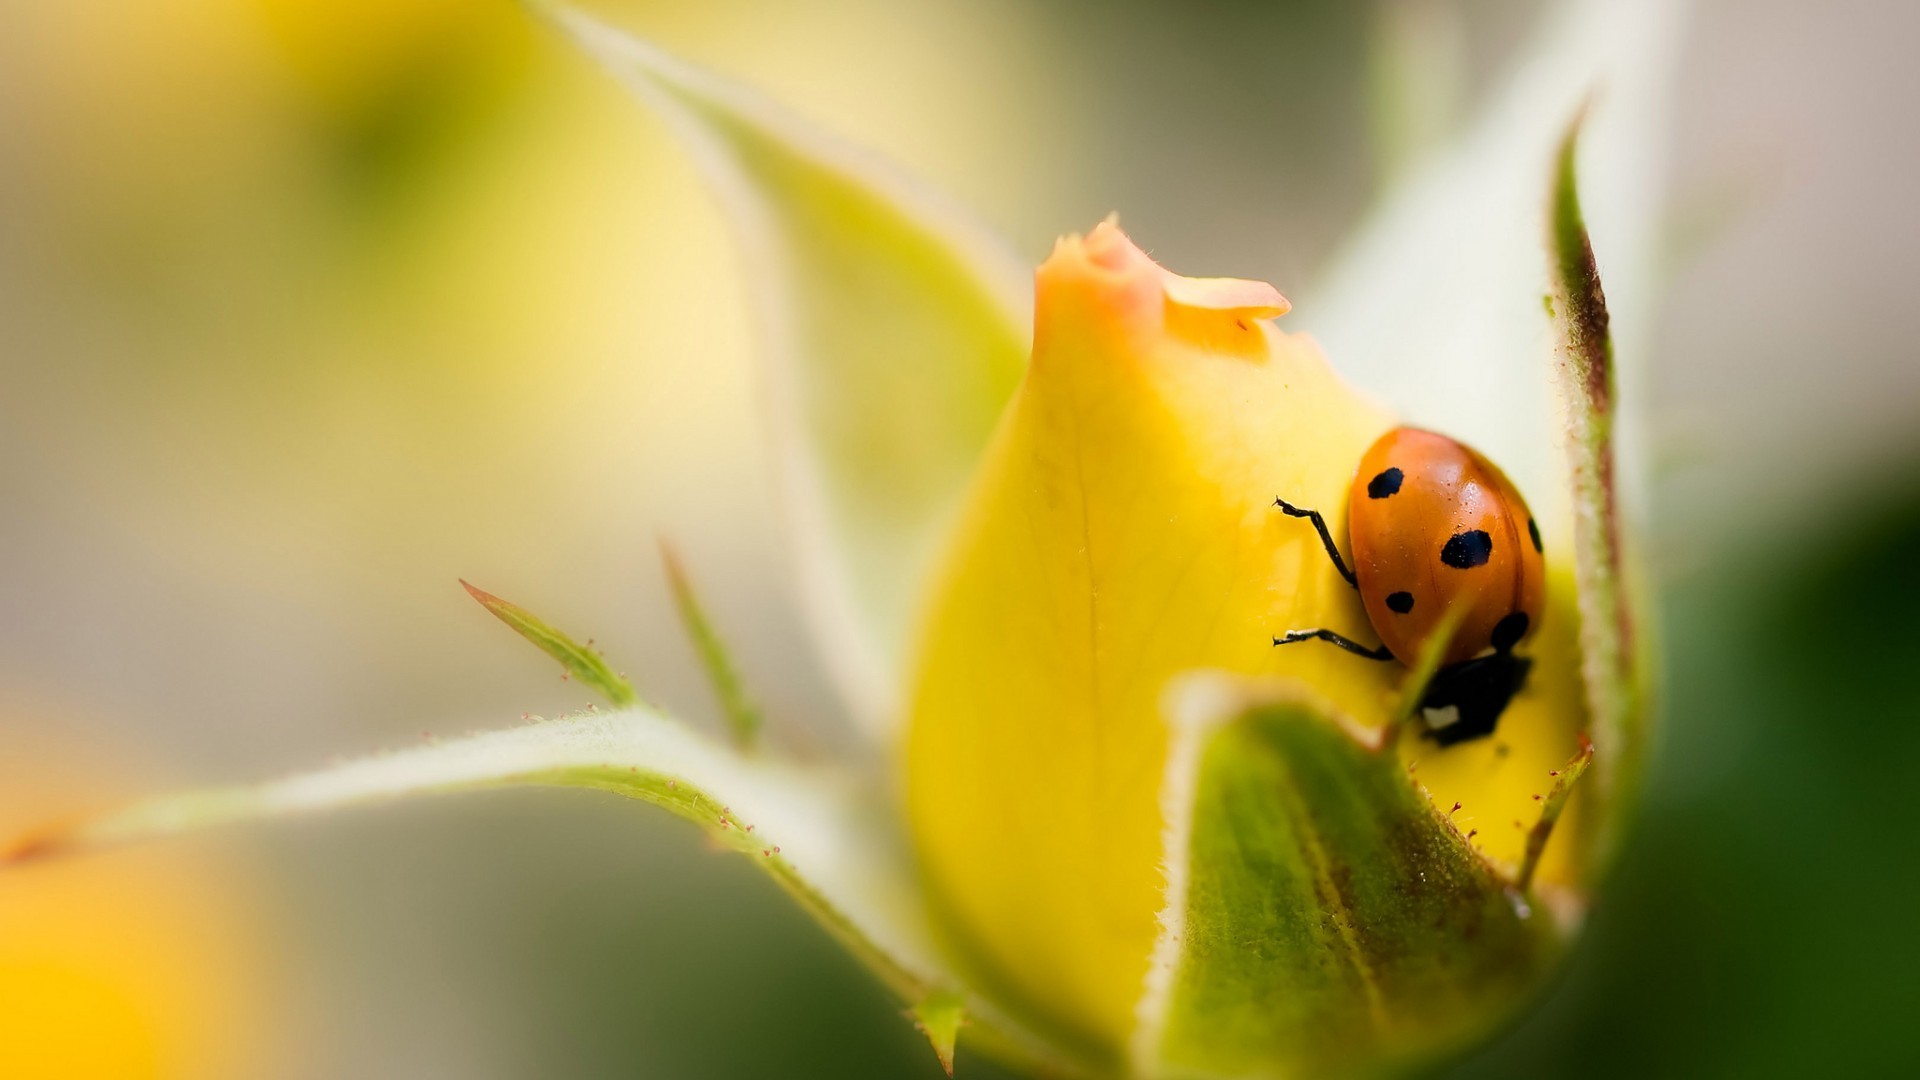 General 1920x1080 rose macro flowers ladybugs insect yellow flowers yellow plants animals